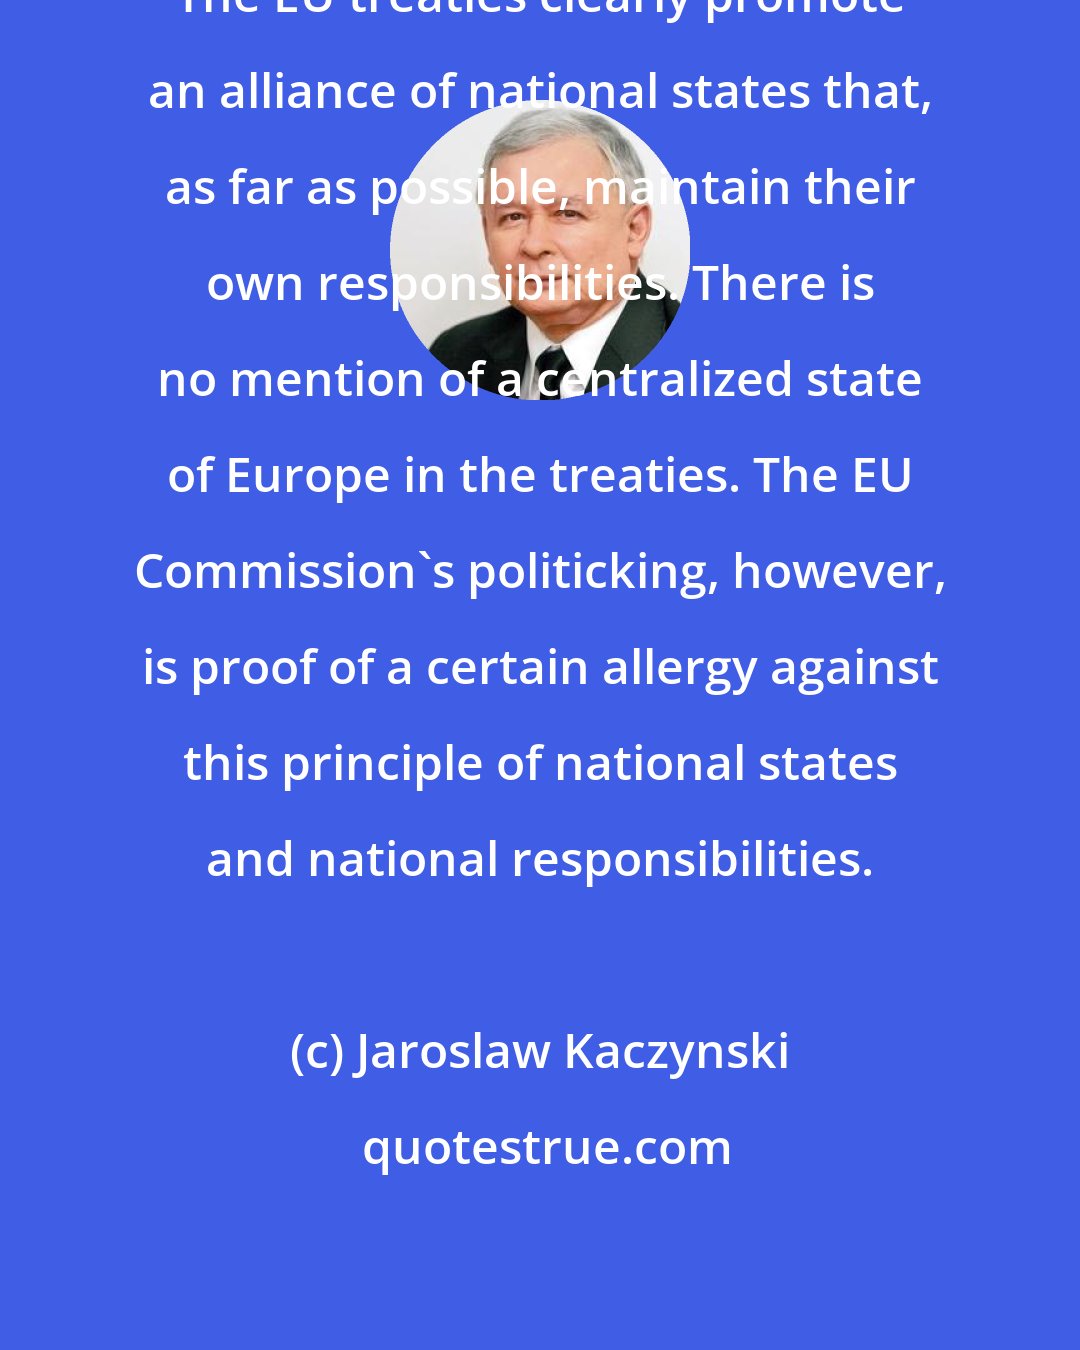 Jaroslaw Kaczynski: The EU treaties clearly promote an alliance of national states that, as far as possible, maintain their own responsibilities. There is no mention of a centralized state of Europe in the treaties. The EU Commission's politicking, however, is proof of a certain allergy against this principle of national states and national responsibilities.